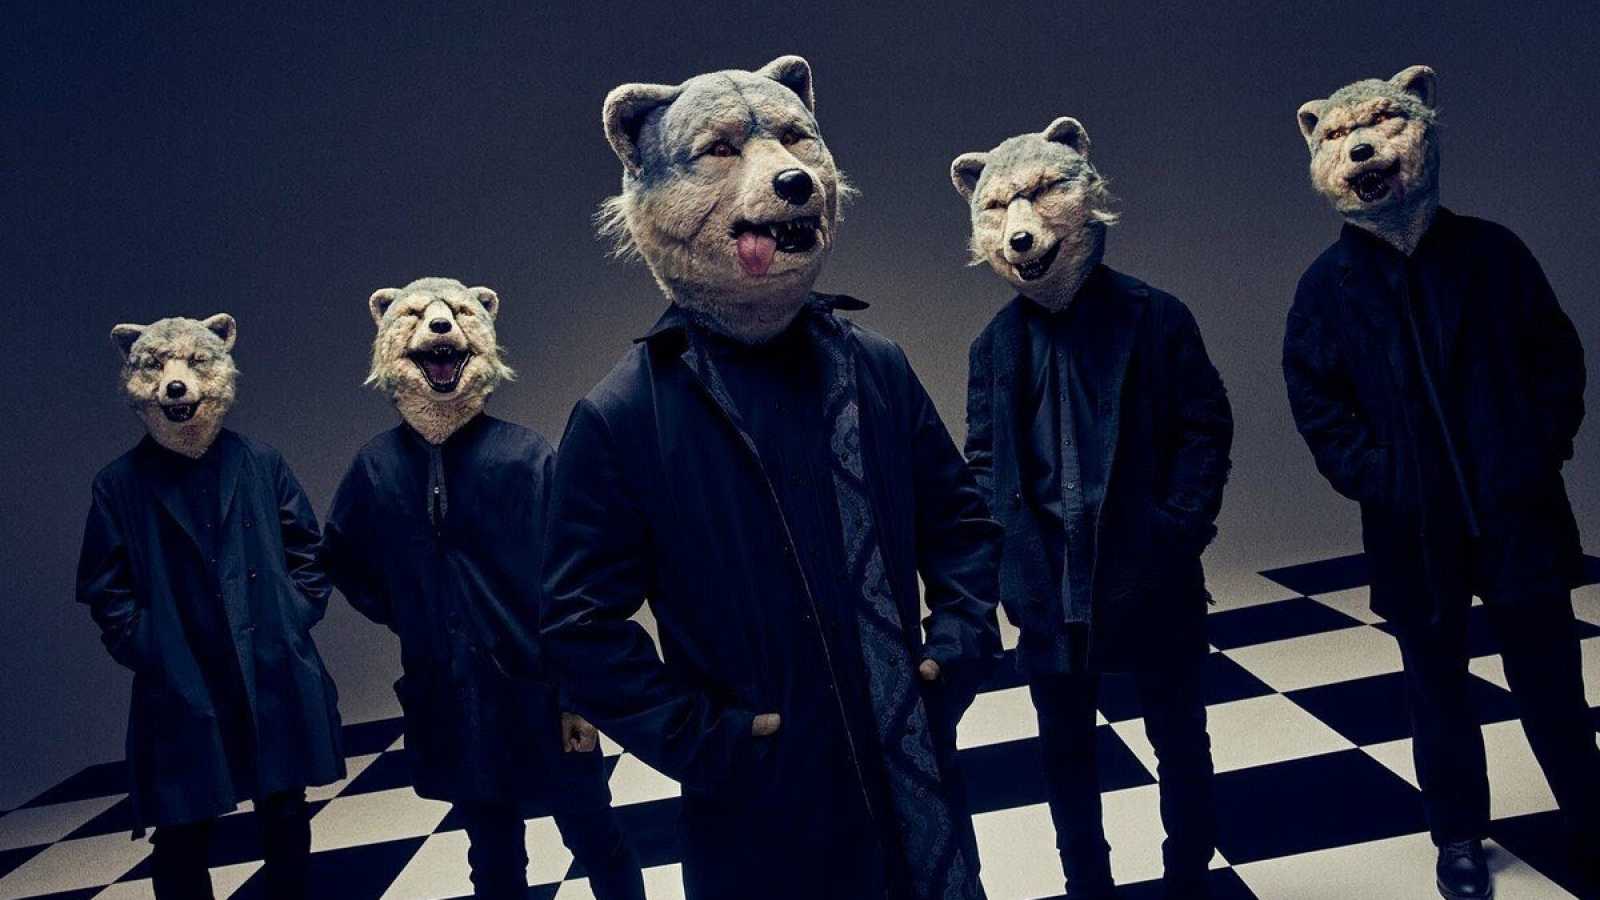 MAN WITH A MISSION © MAN WITH A MISSION. All rights reserved.